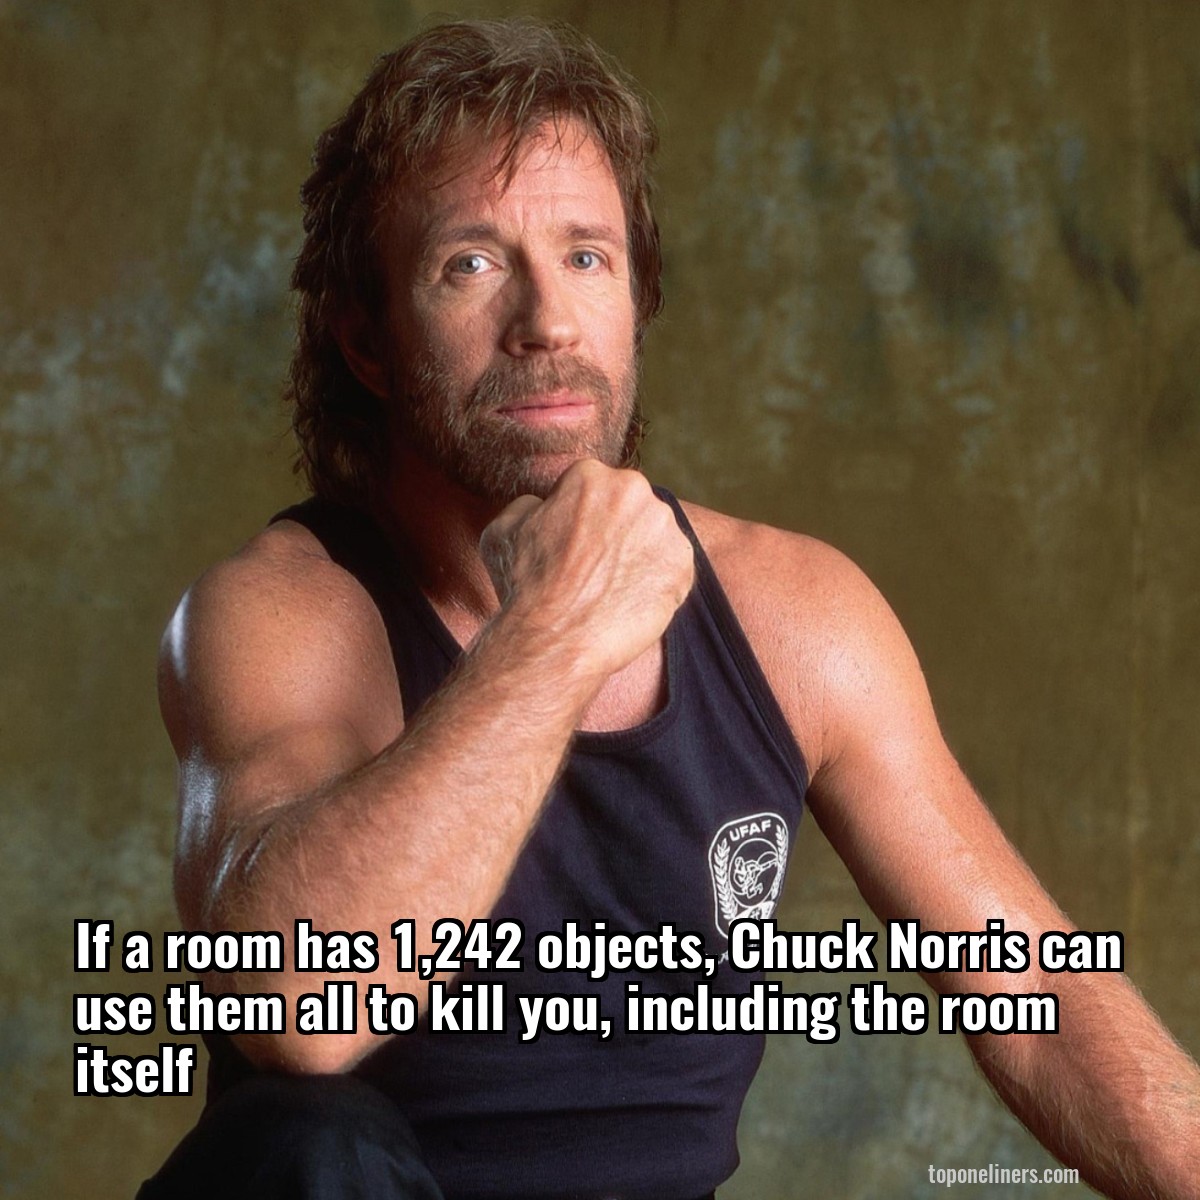 If a room has 1,242 objects, Chuck Norris can use them all to kill you, including the room itself